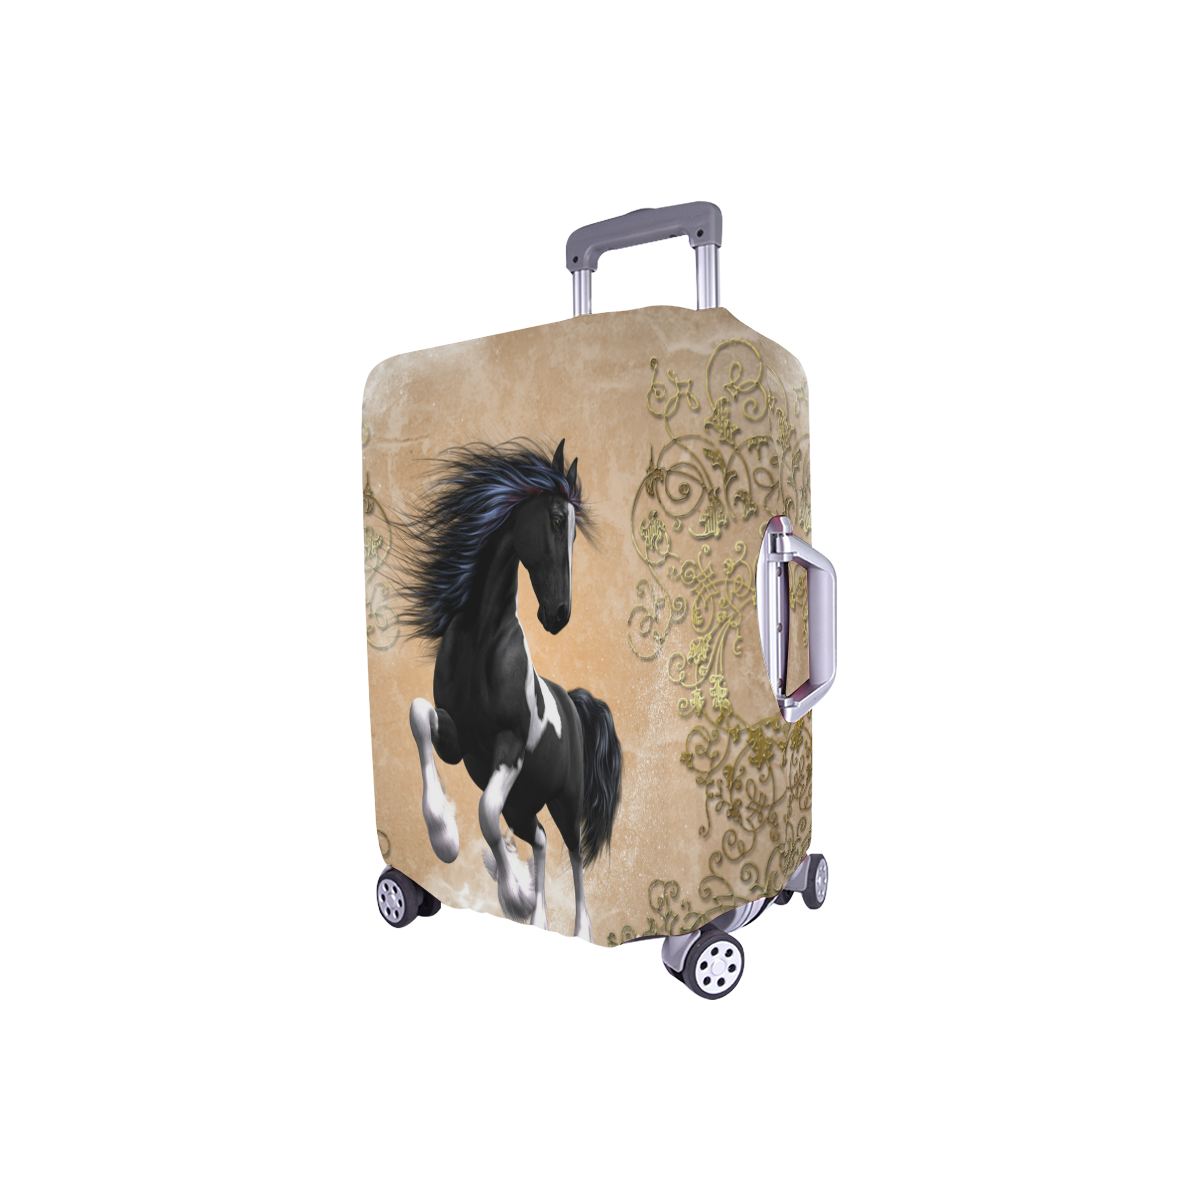 Wonderful horse Luggage Cover/Small 18"-21"